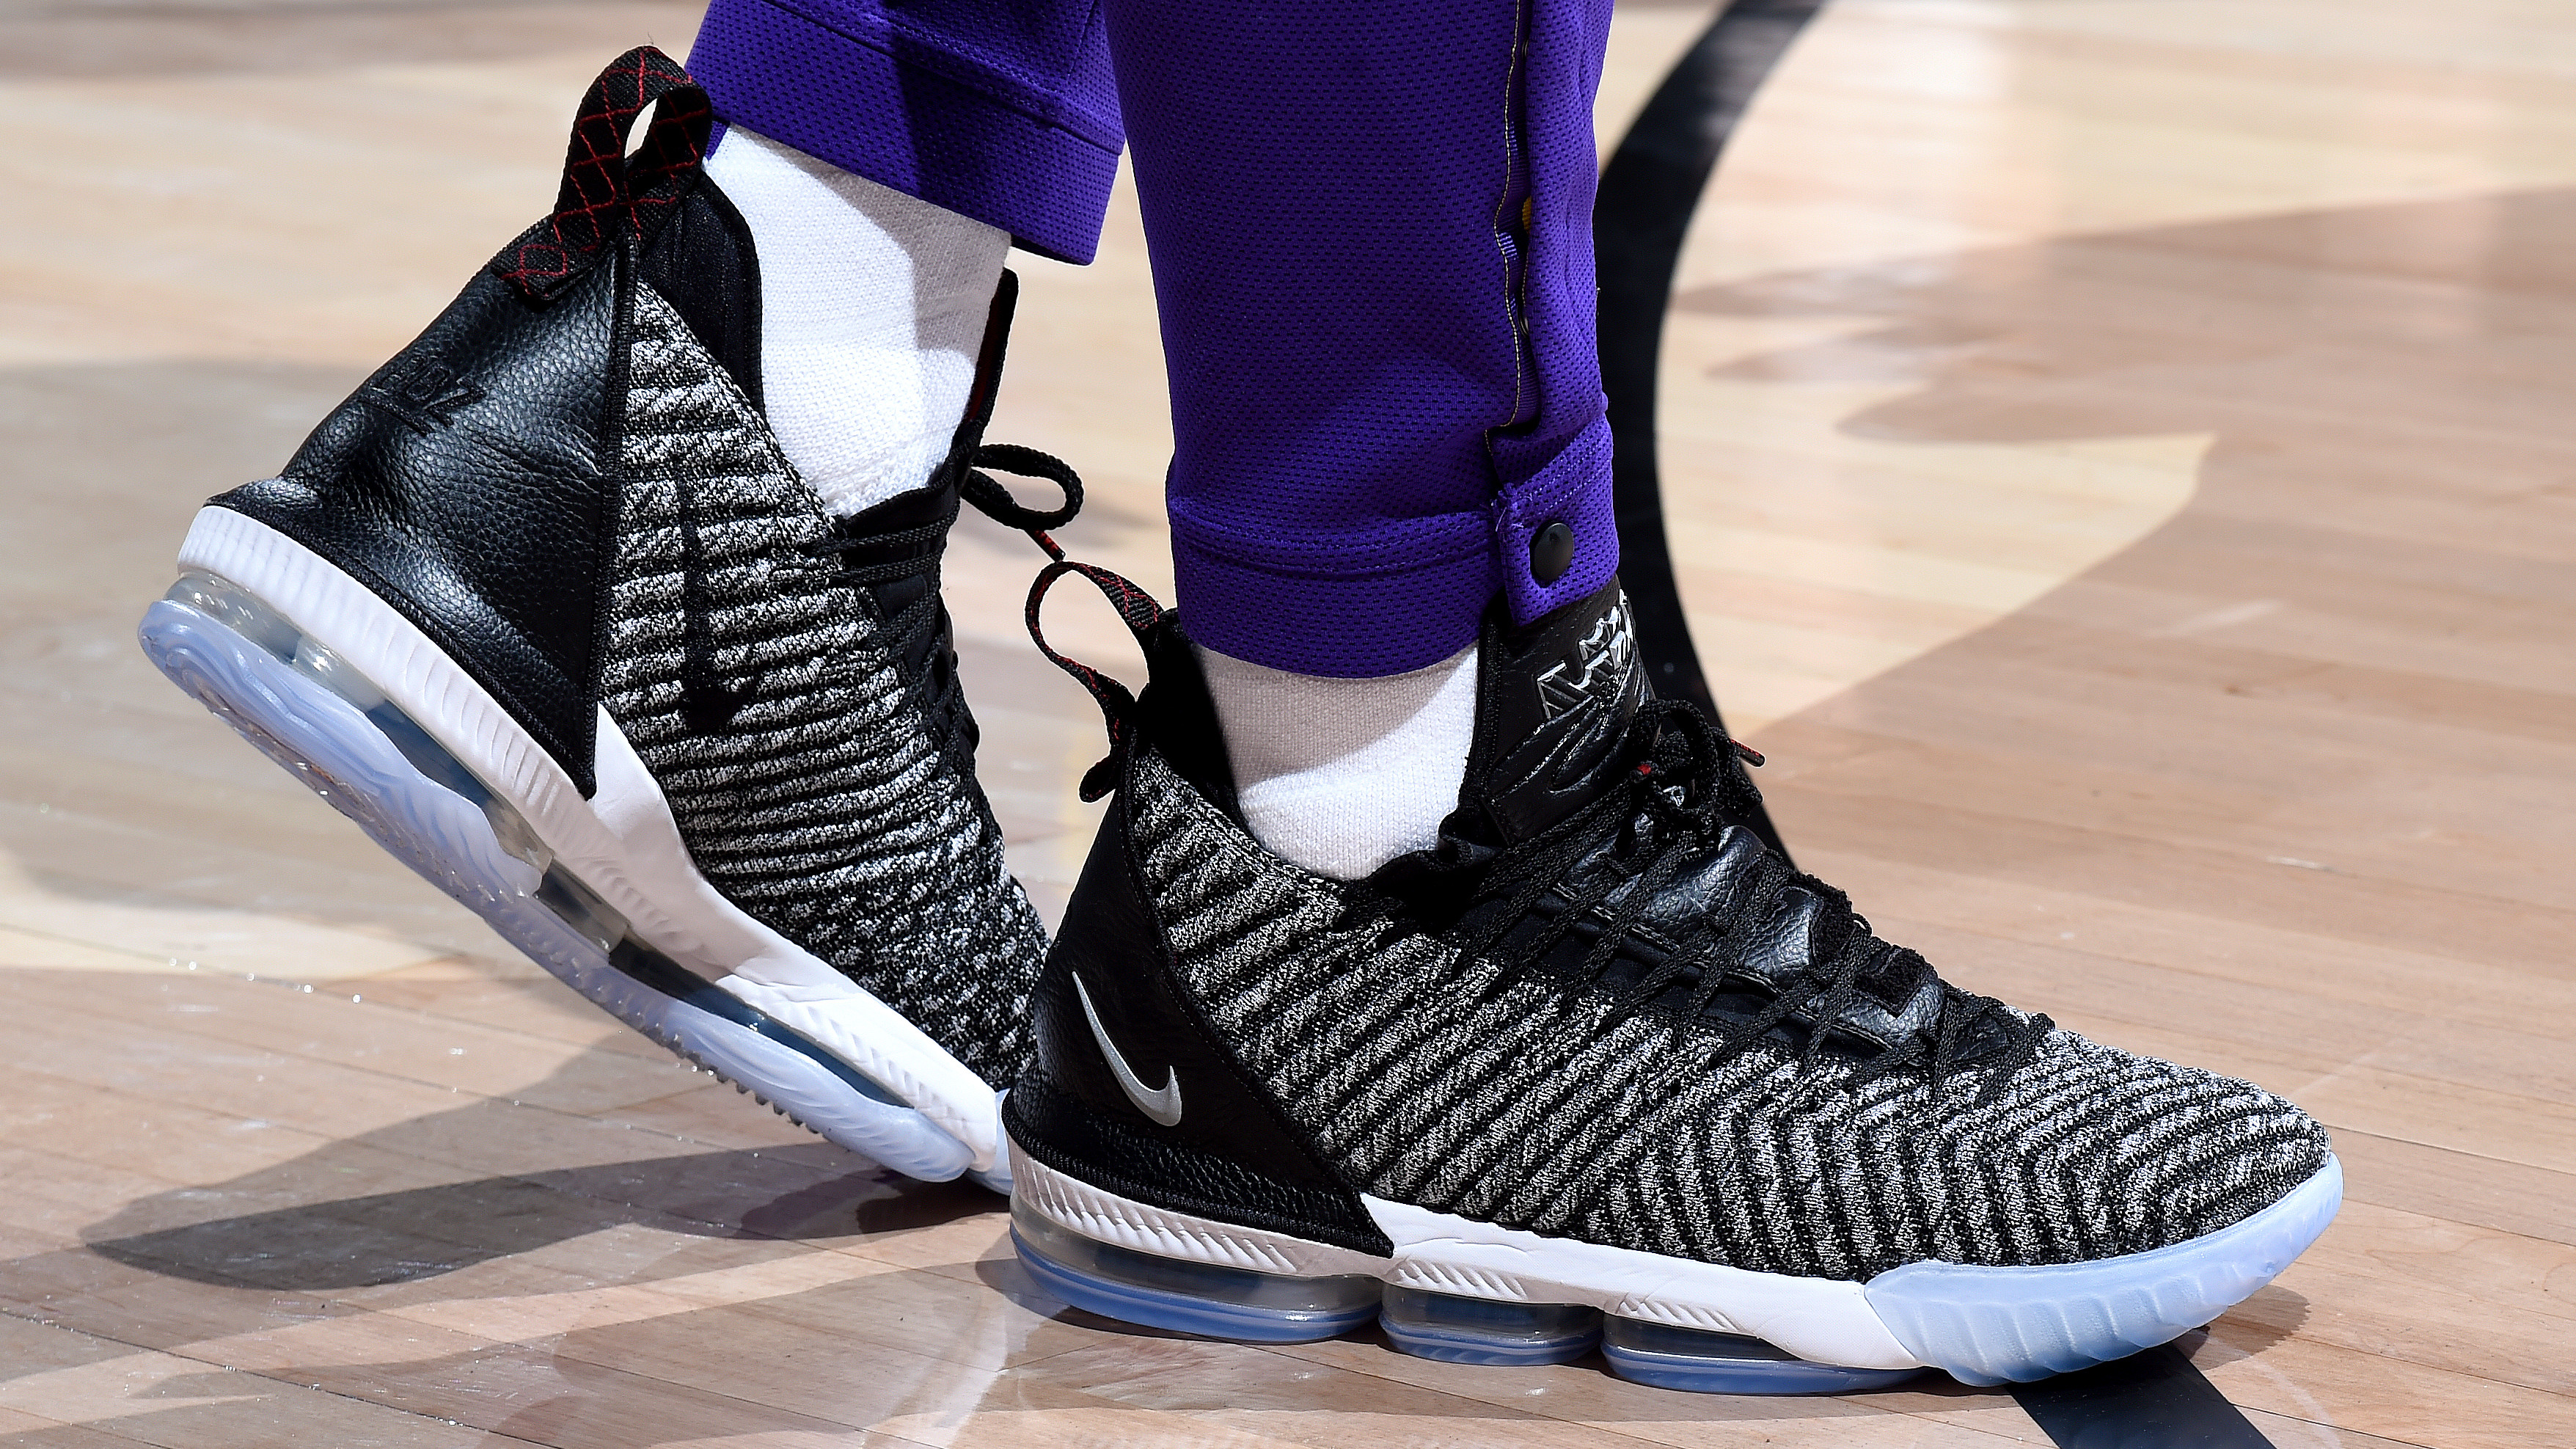 Desplazamiento Maestro famélico SoleWatch: LeBron James Makes Lakers Debut in the 'Oreo' Nike LeBron 16 |  Complex